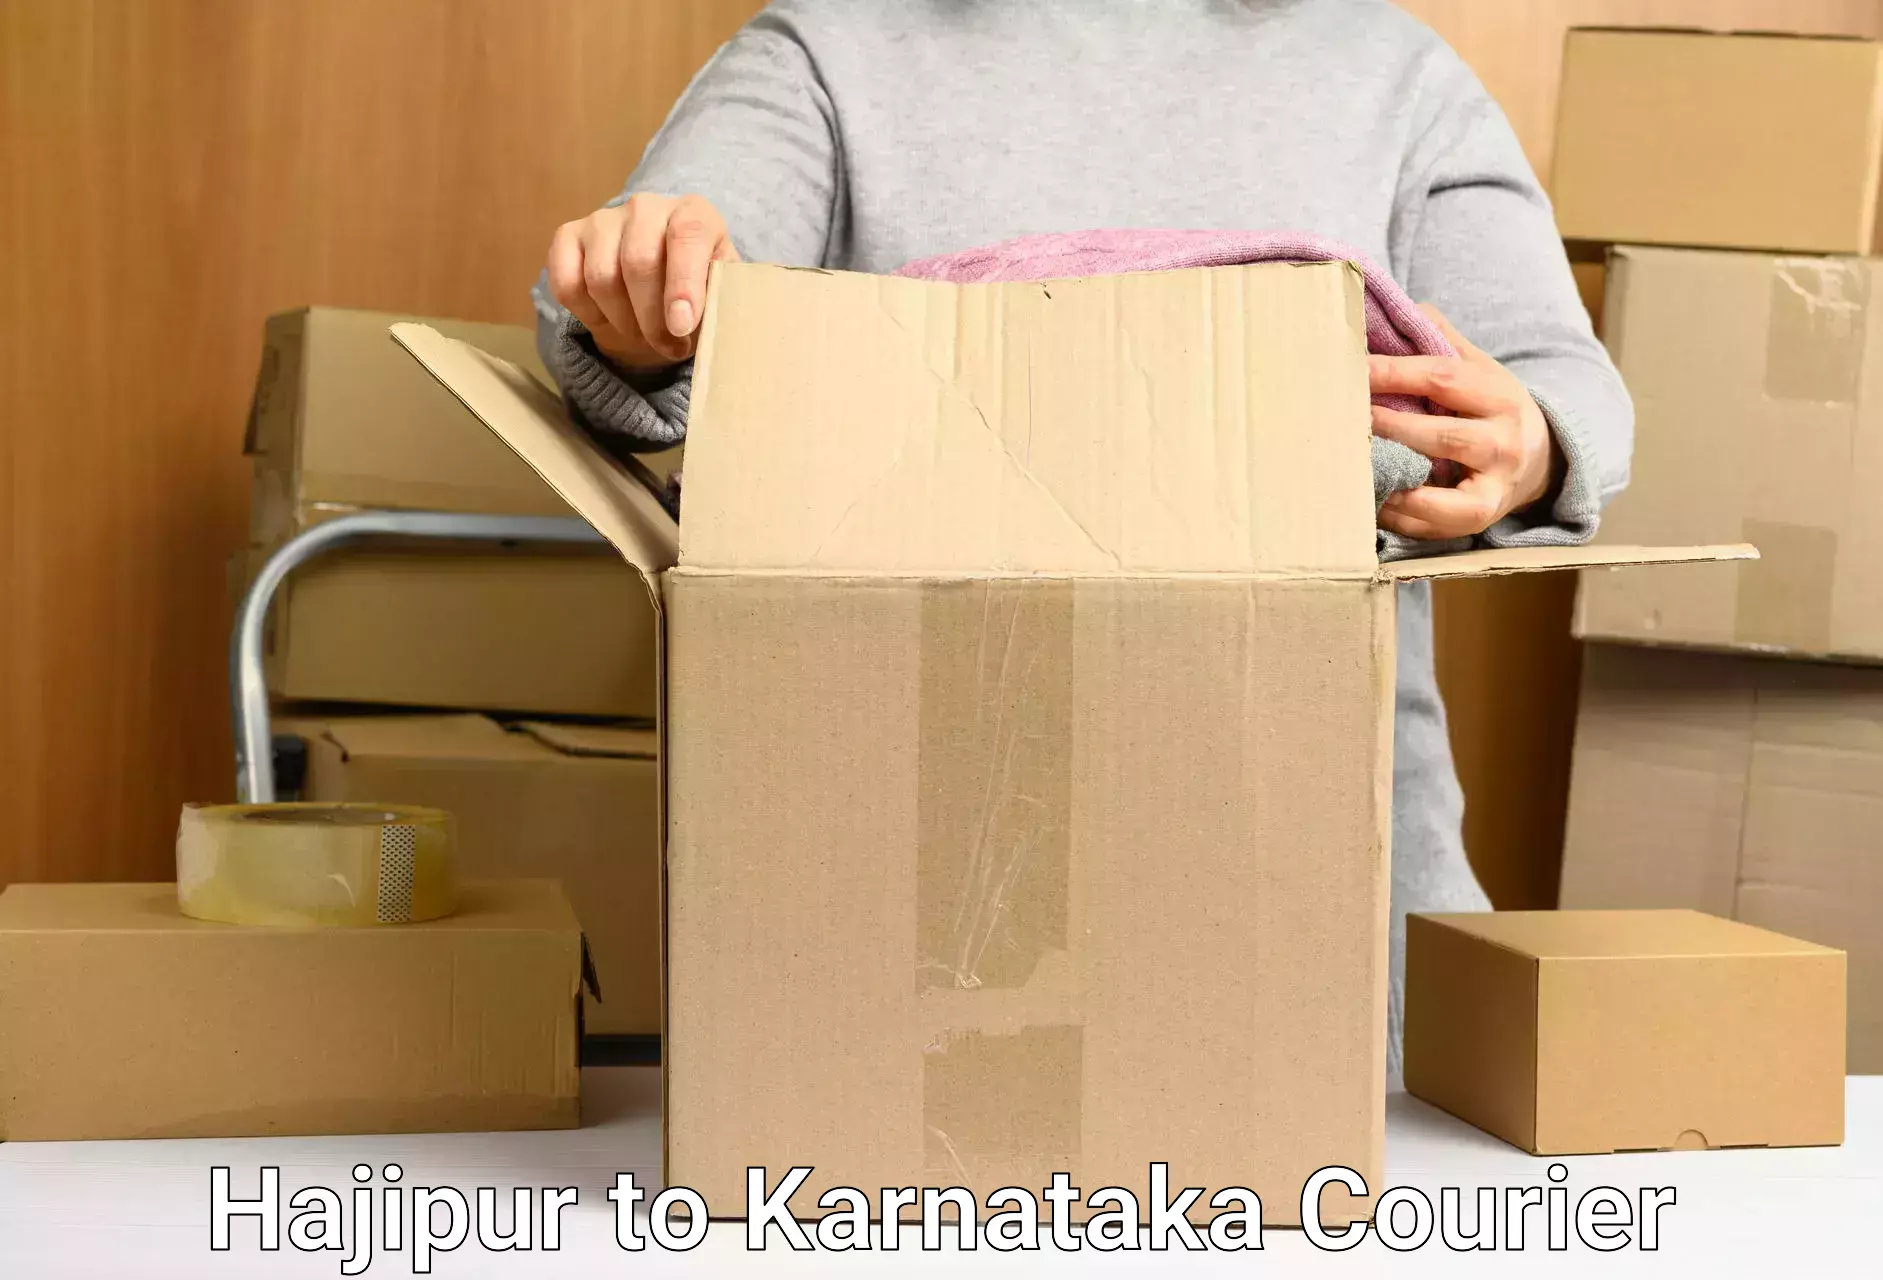 On-call courier service Hajipur to Udupi